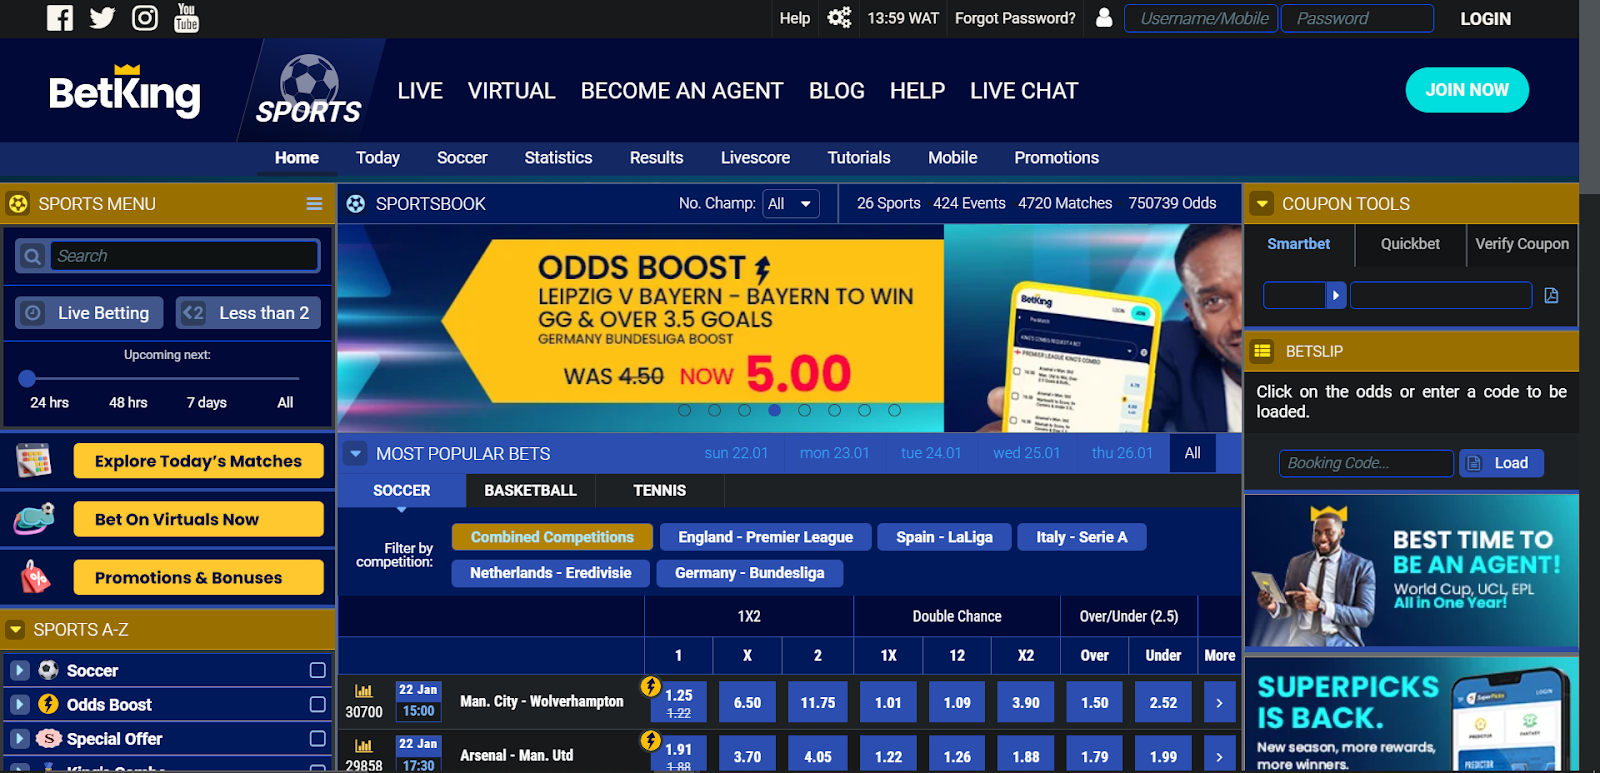 Mobile version of the BetKing Nigeria website